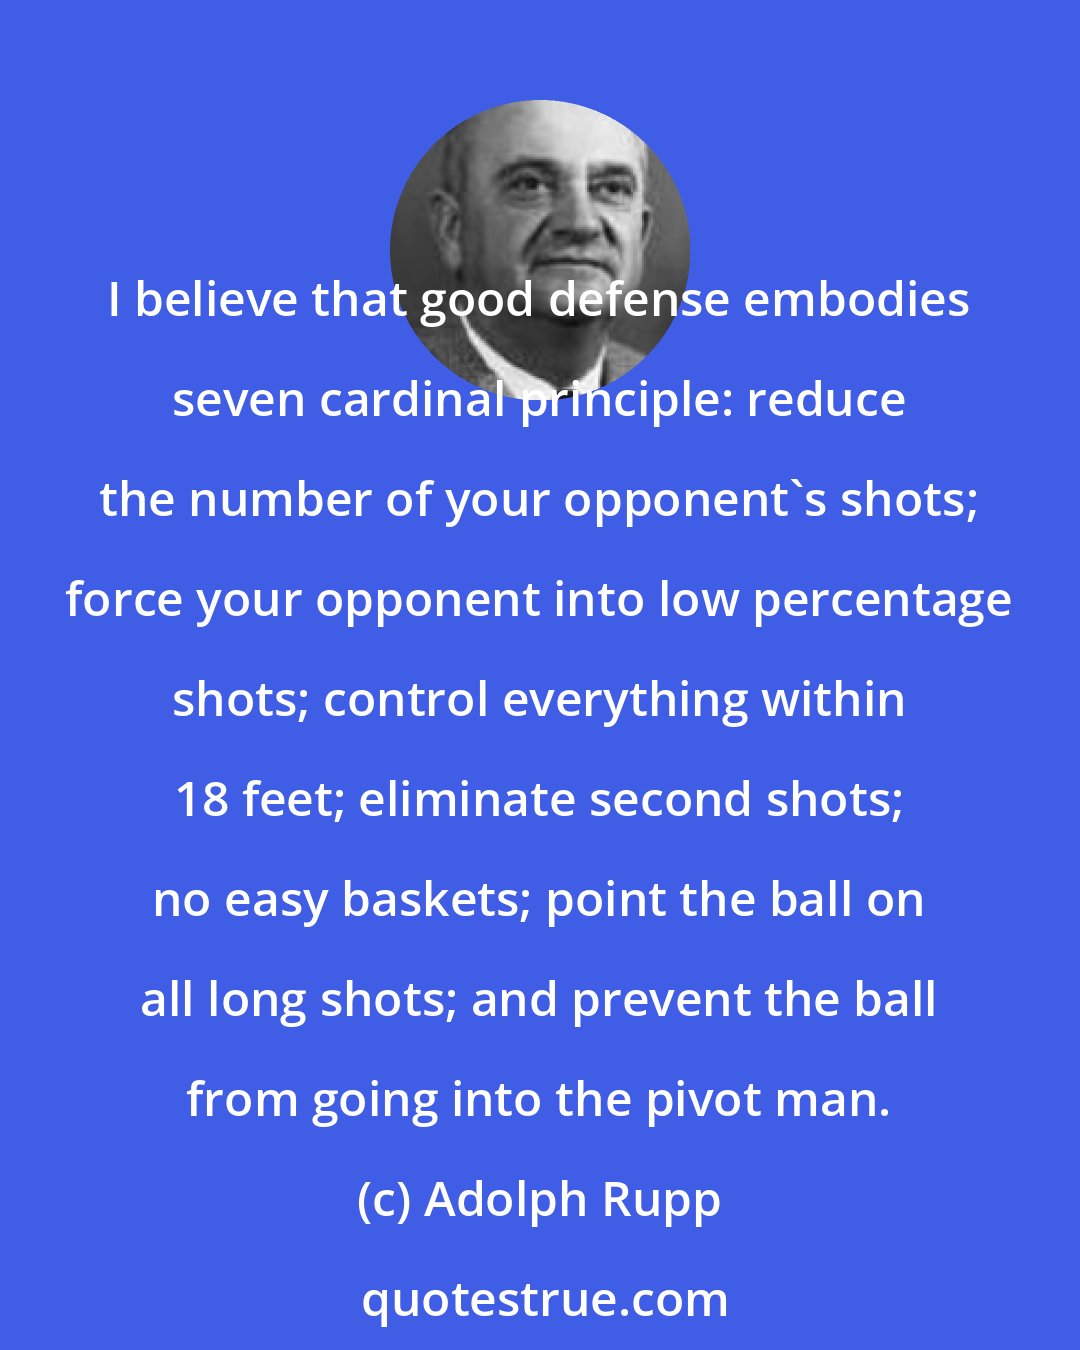 Adolph Rupp: I believe that good defense embodies seven cardinal principle: reduce the number of your opponent's shots; force your opponent into low percentage shots; control everything within 18 feet; eliminate second shots; no easy baskets; point the ball on all long shots; and prevent the ball from going into the pivot man.